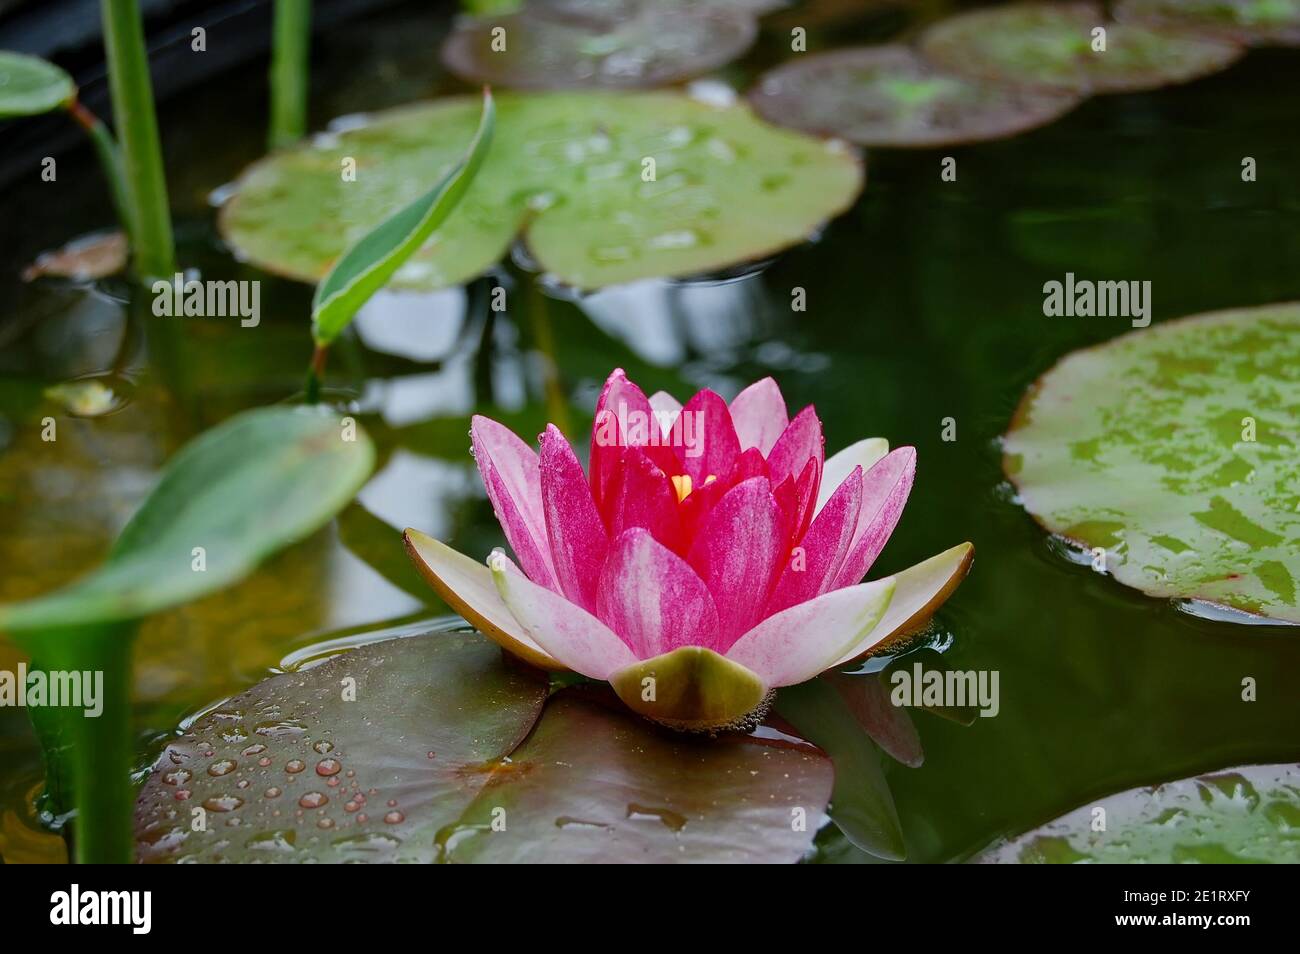 Closeup of a half-open pink waterlily in a garden pond surrounded by green water leaves. The Latin name for waterlily is nymphaea. Stock Photo